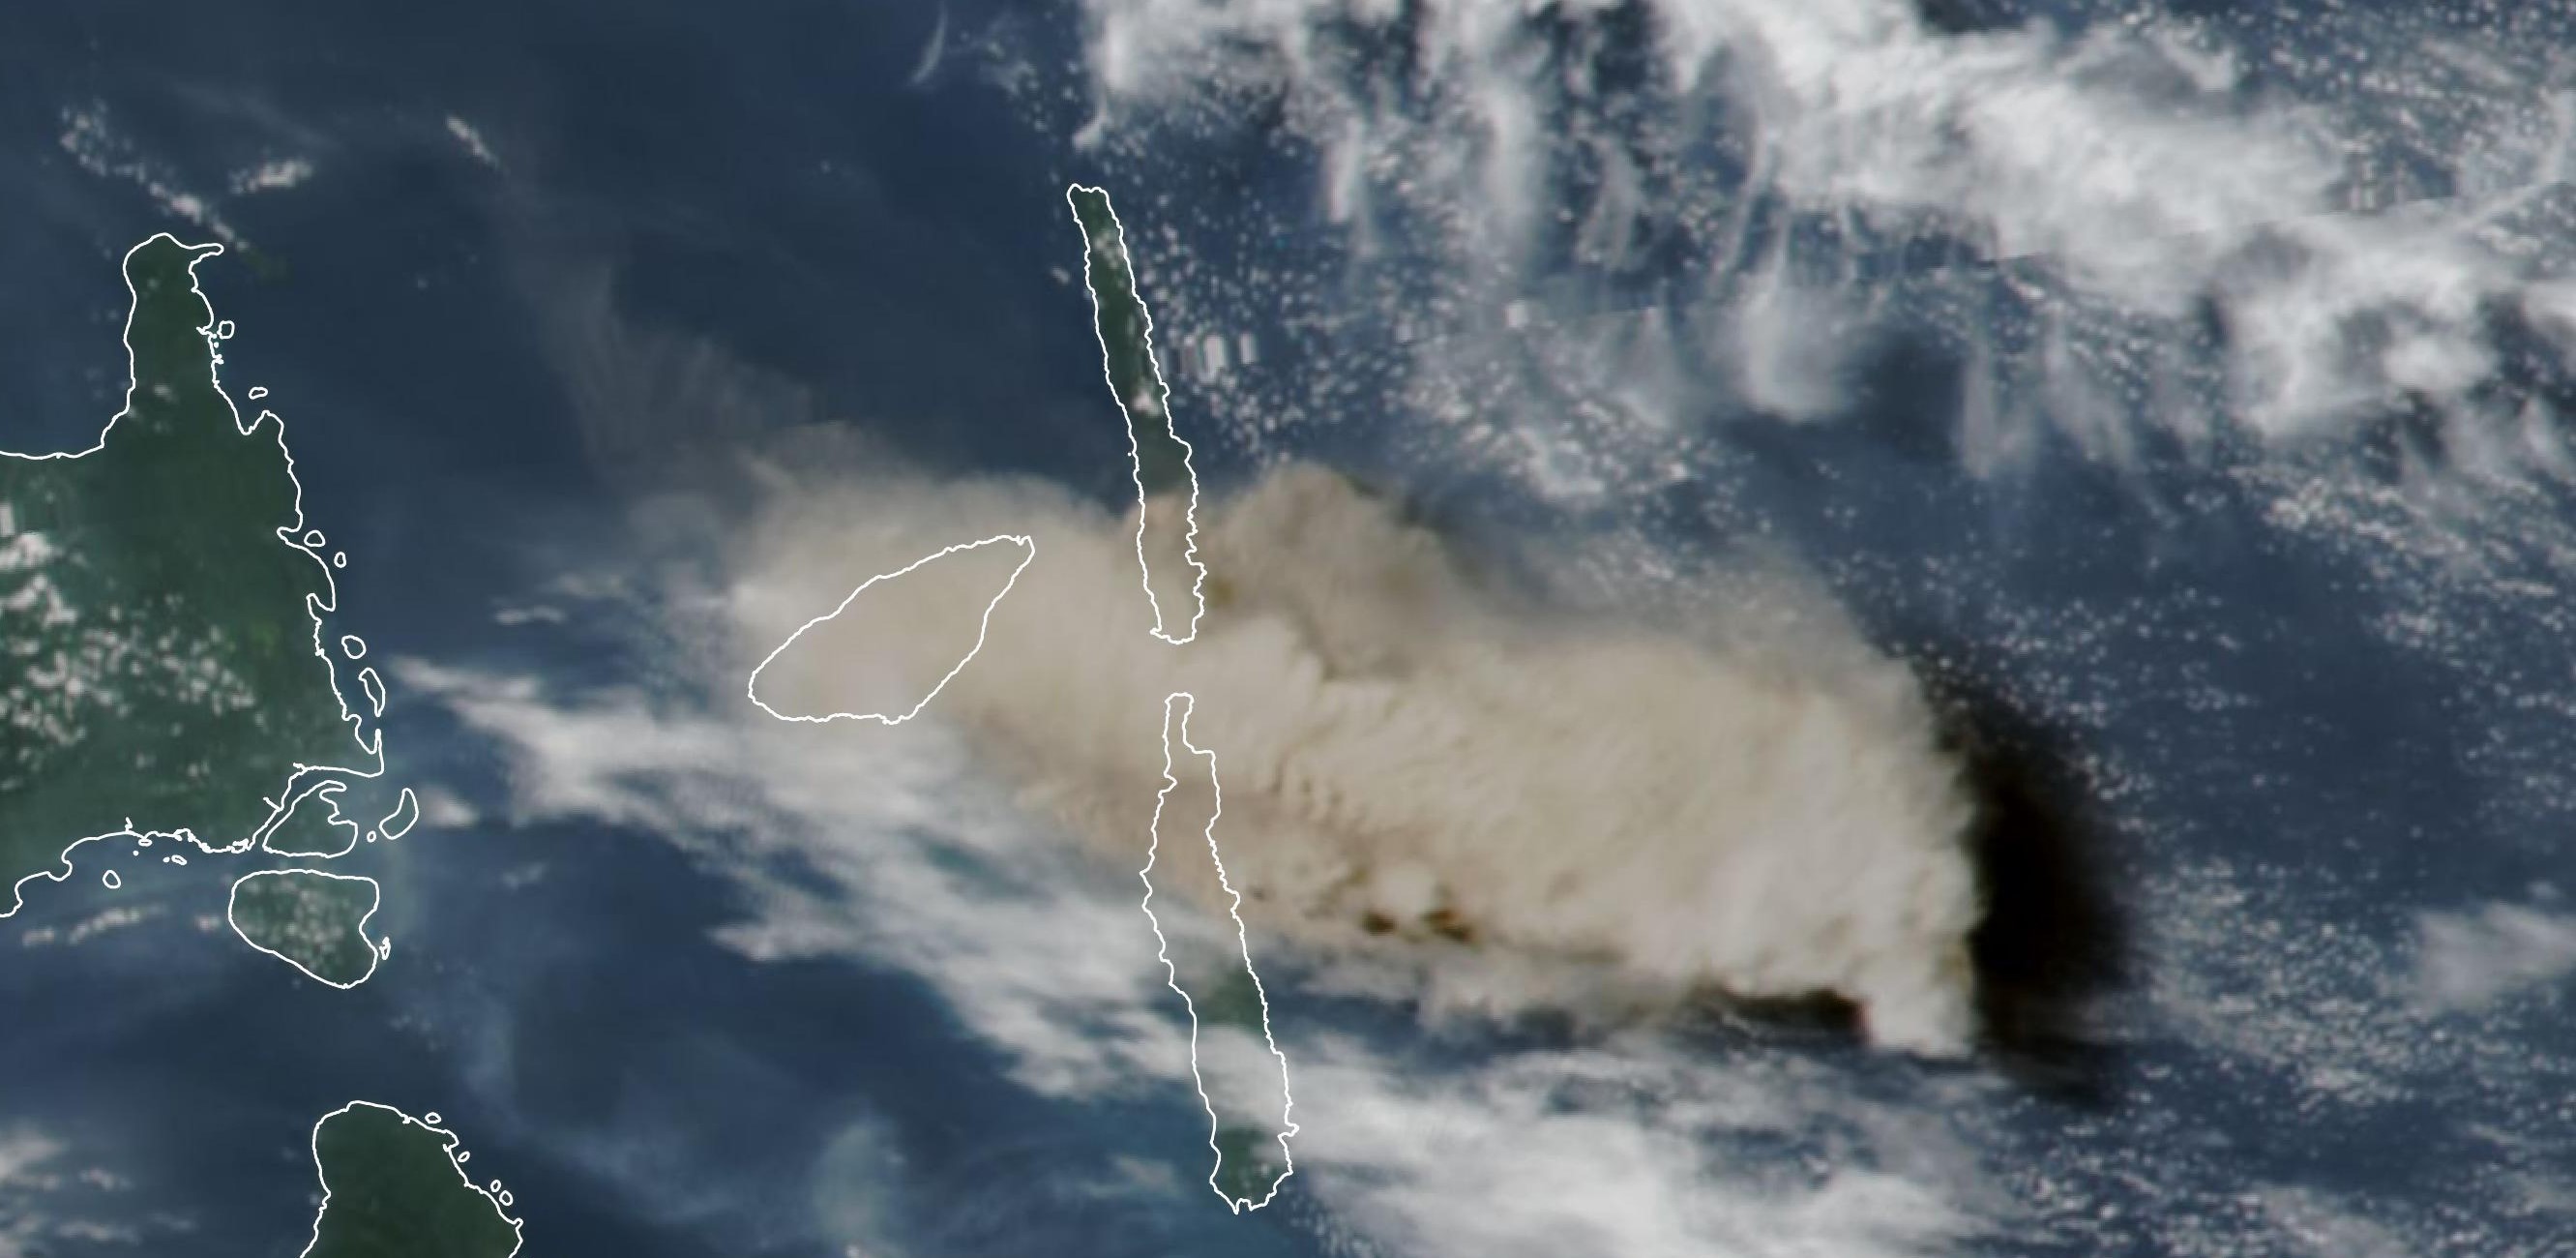 Satellite image showing volcanic ash over an island